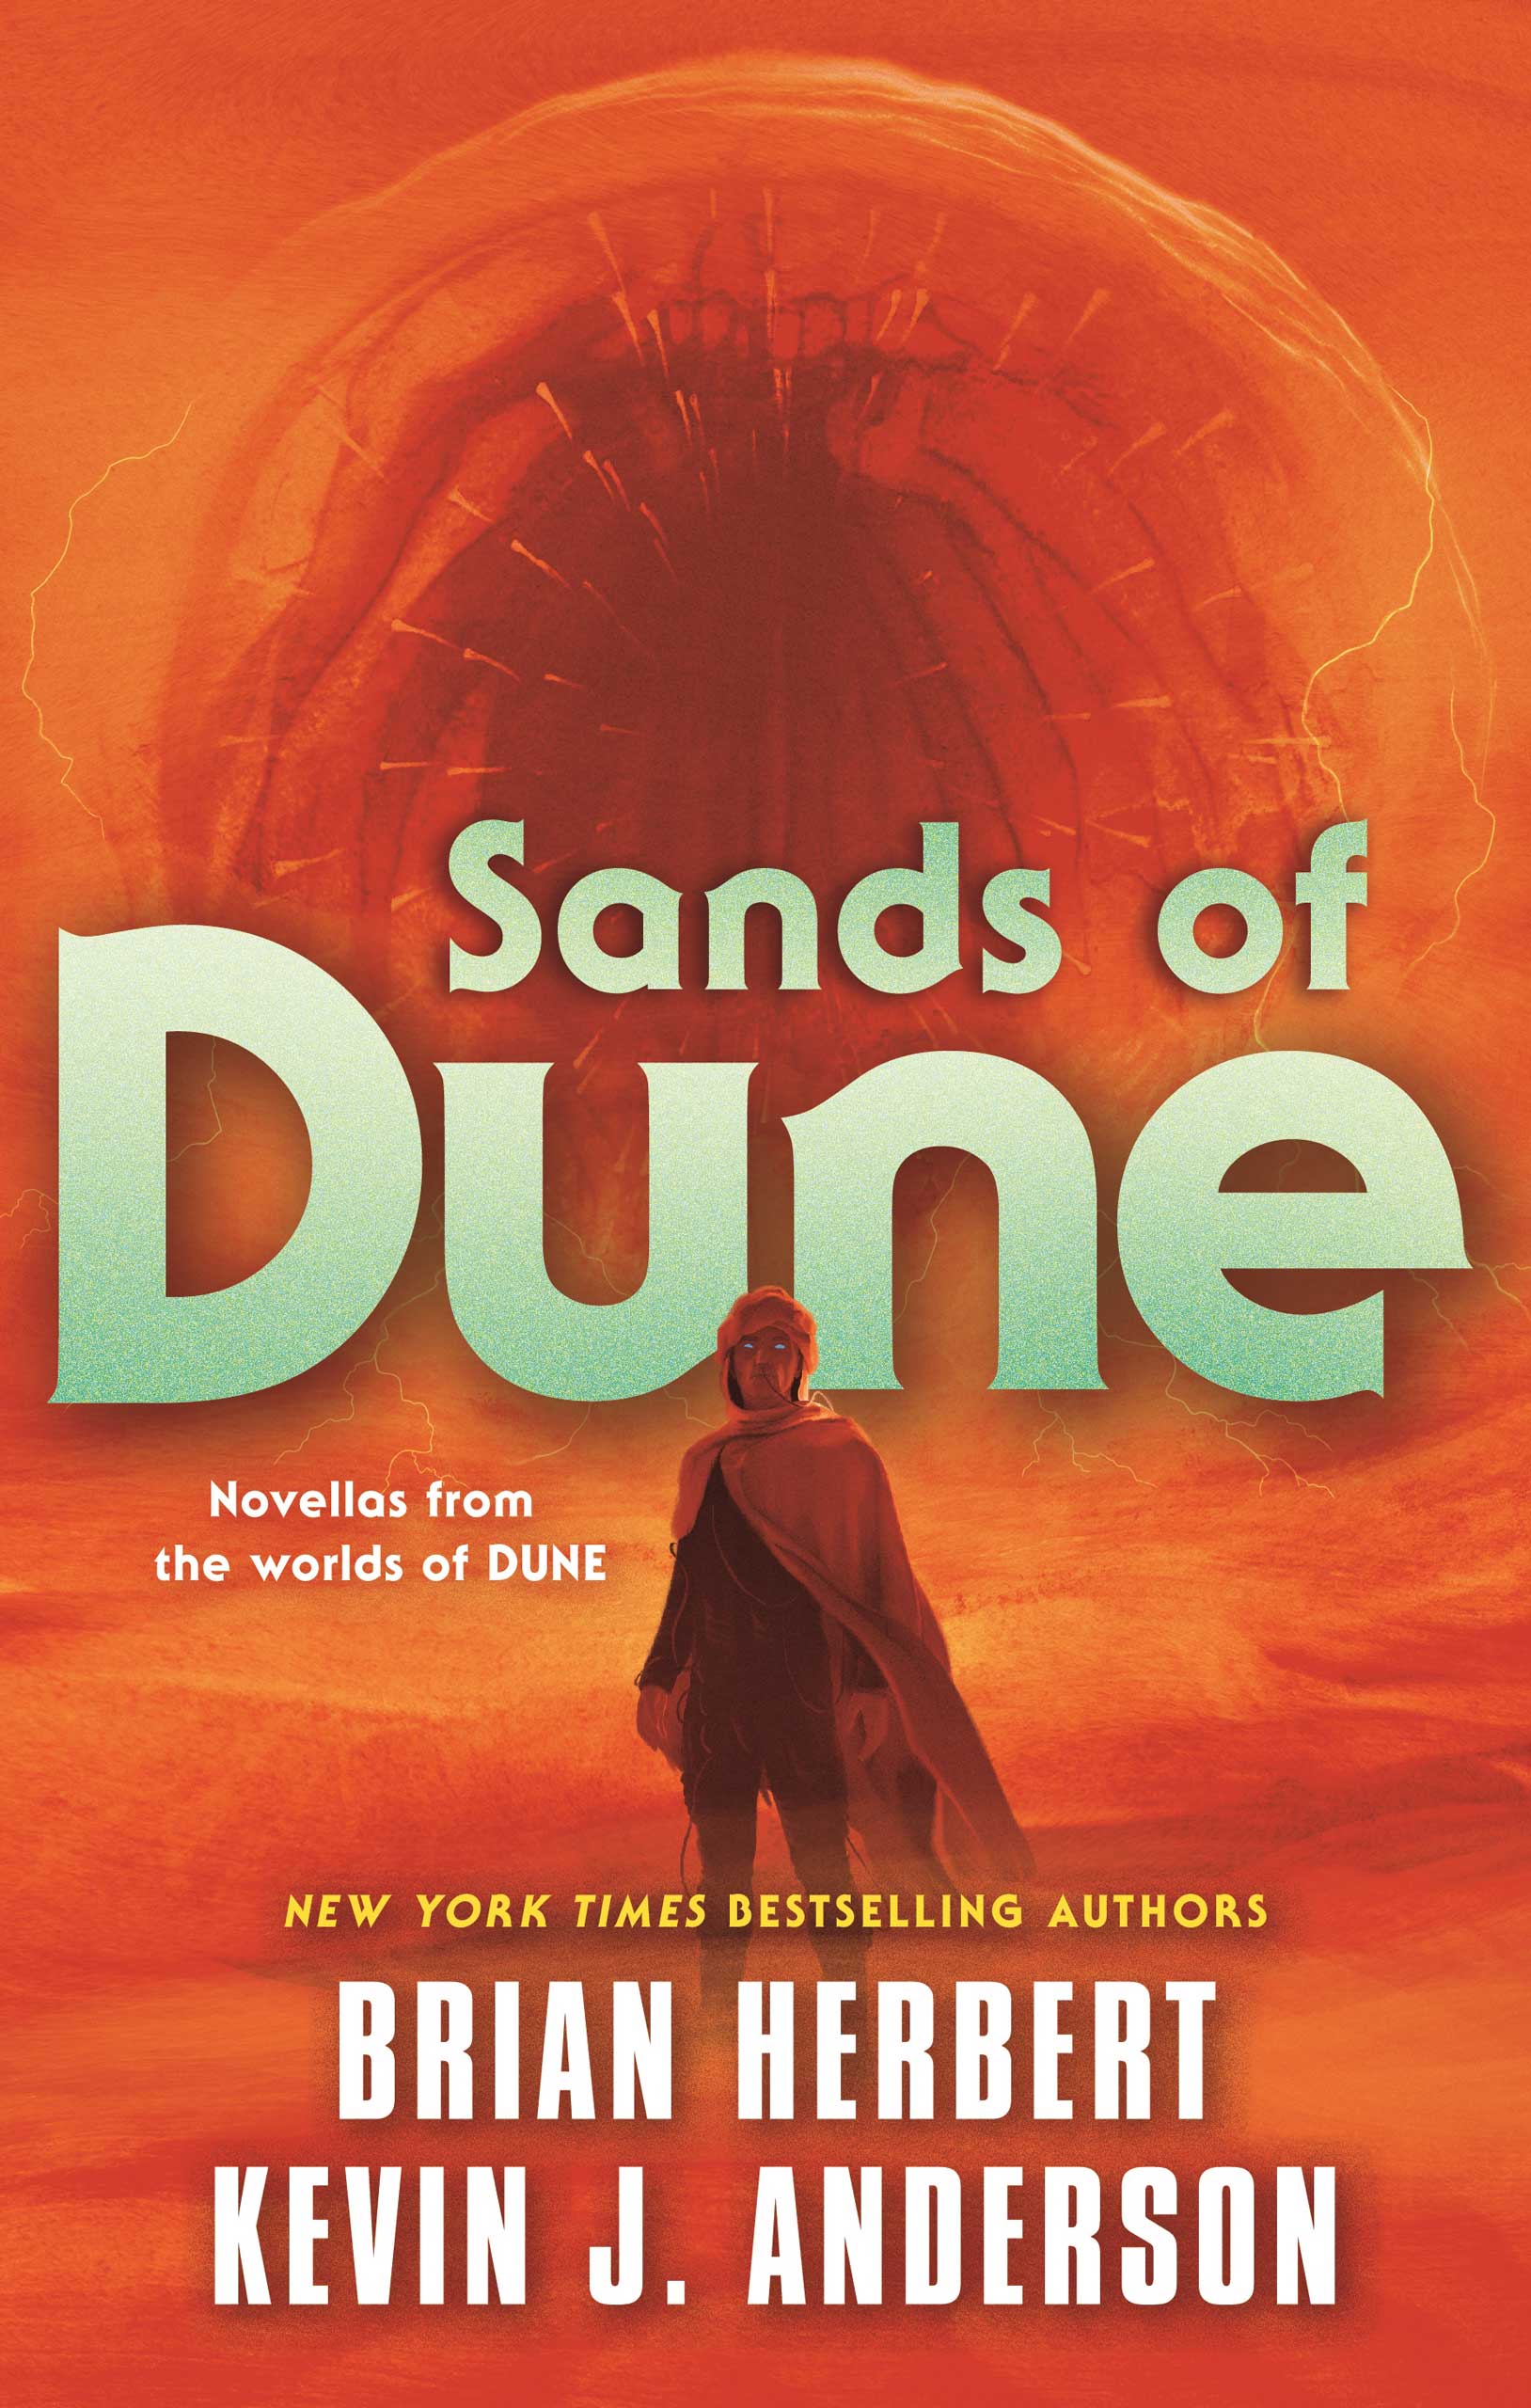 Matt Griffin's cover art for 'Sands of Dune', a collection of Dune novellas, by Brian Herbert and Kevin J Anderson.